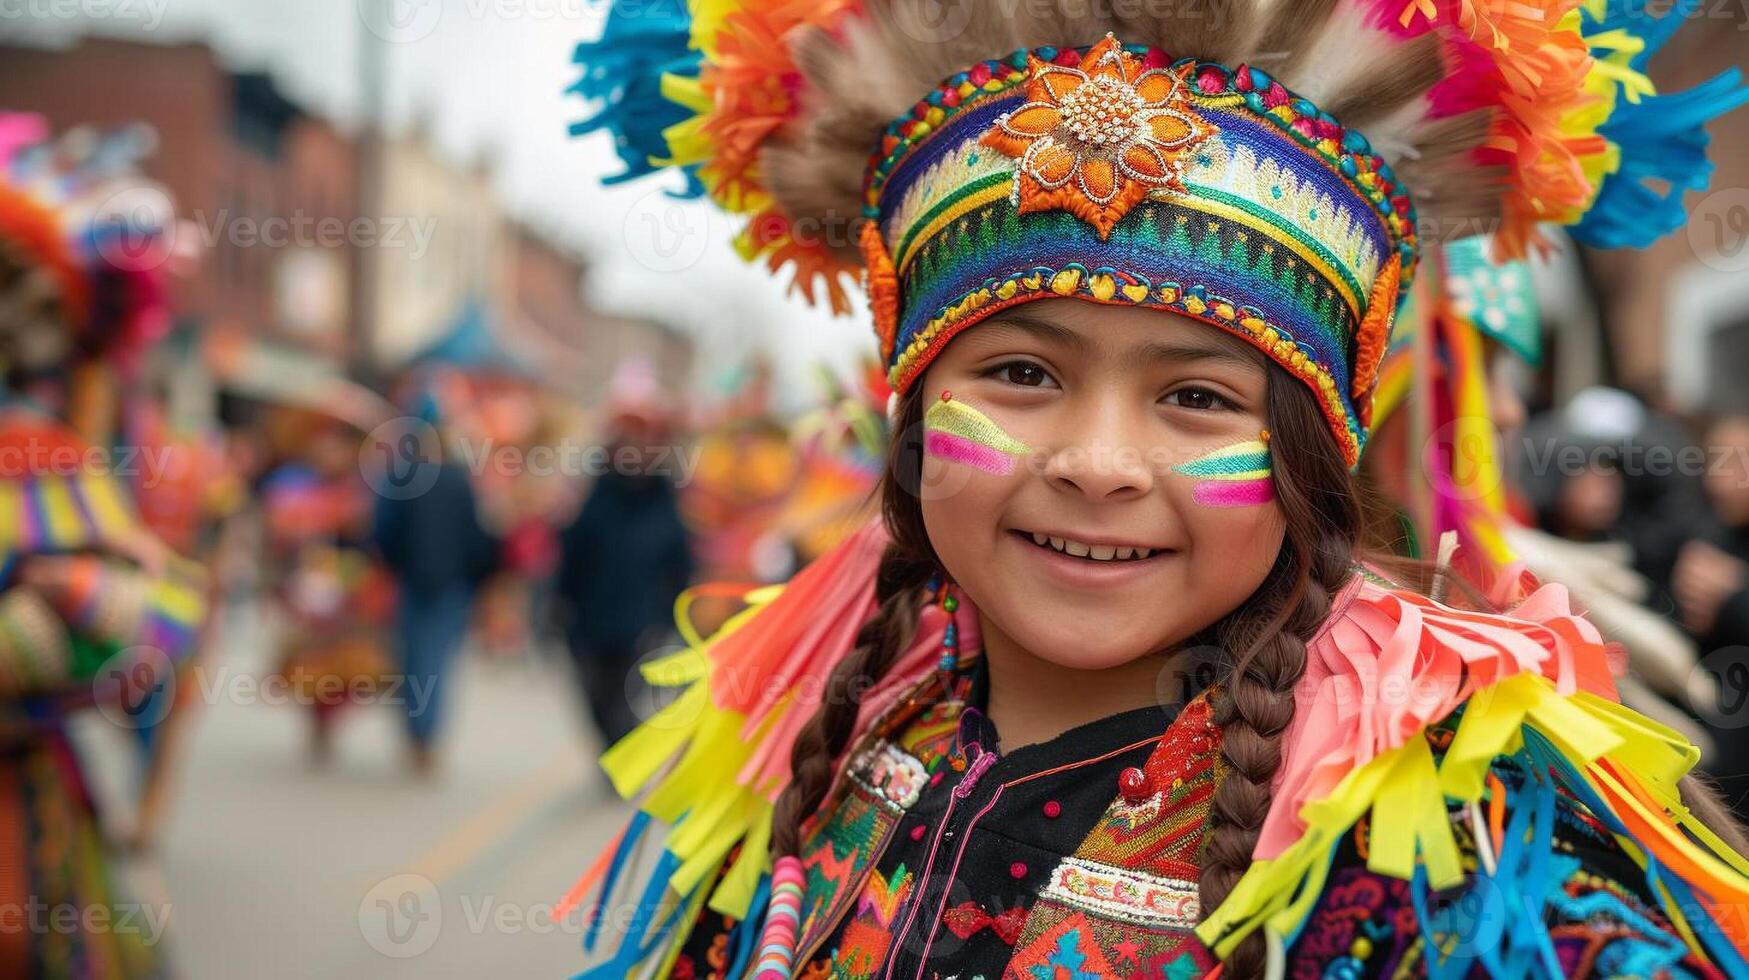 AI generated Young Girl in Traditional Festival Costume Smiling. A cheerful young girl adorned in a vibrant, traditional festival costume with colorful feathers and face paint, celebrating cultural photo